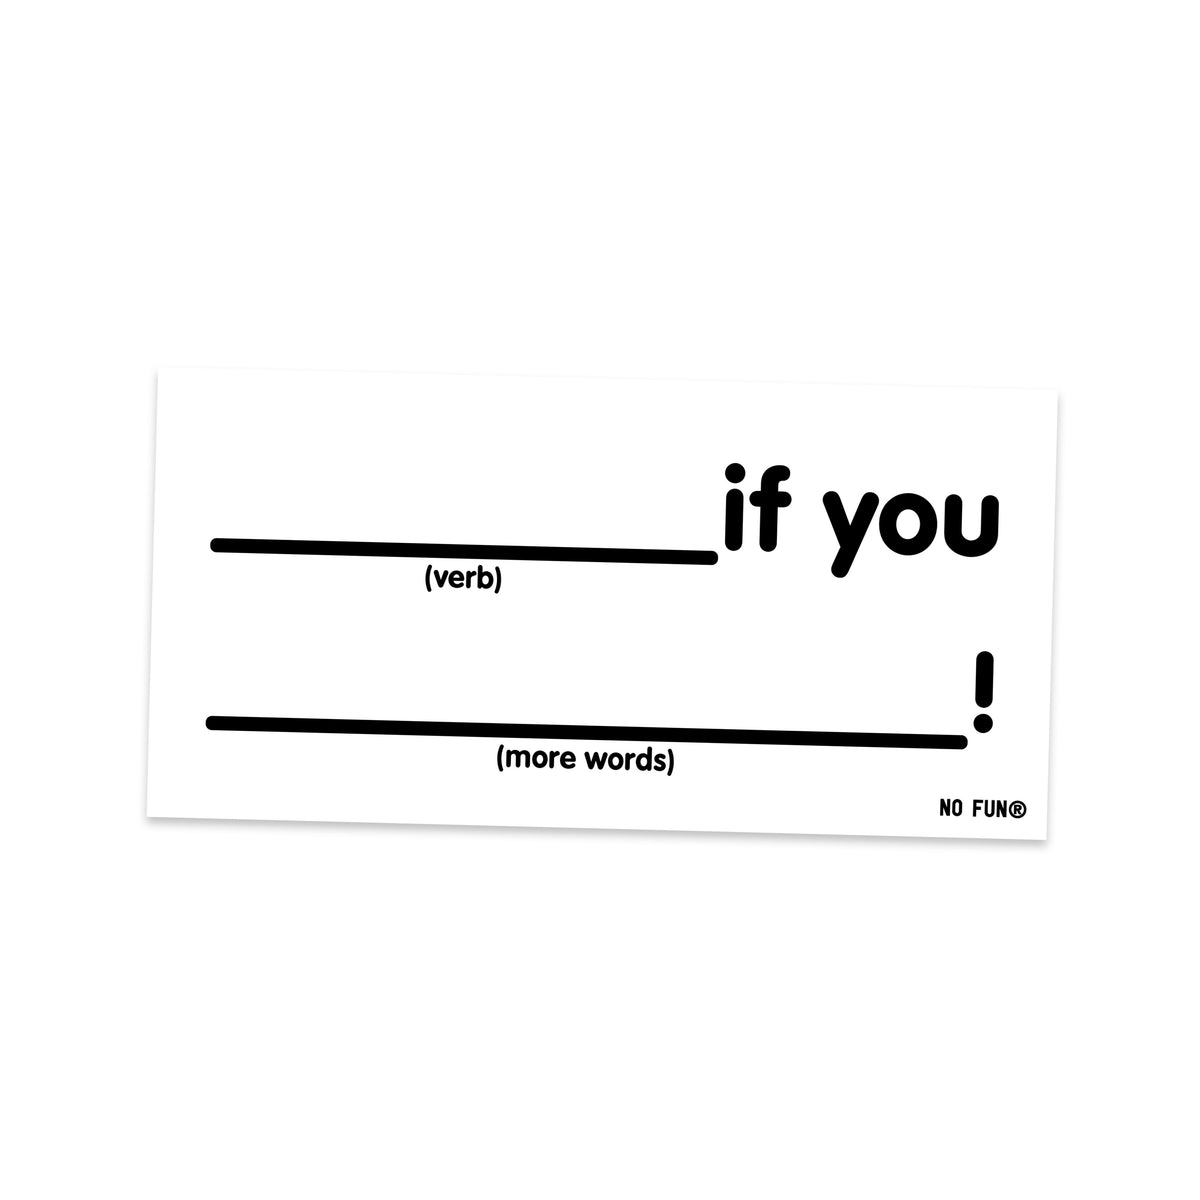 The "Do It Yourself" bumper sticker by No Fun®.  Sticker is white, with the phrase "_________ if you ___________!" printed in black.   There is a small "No Fun®" logo in the bottom right hand corner of the sticker.